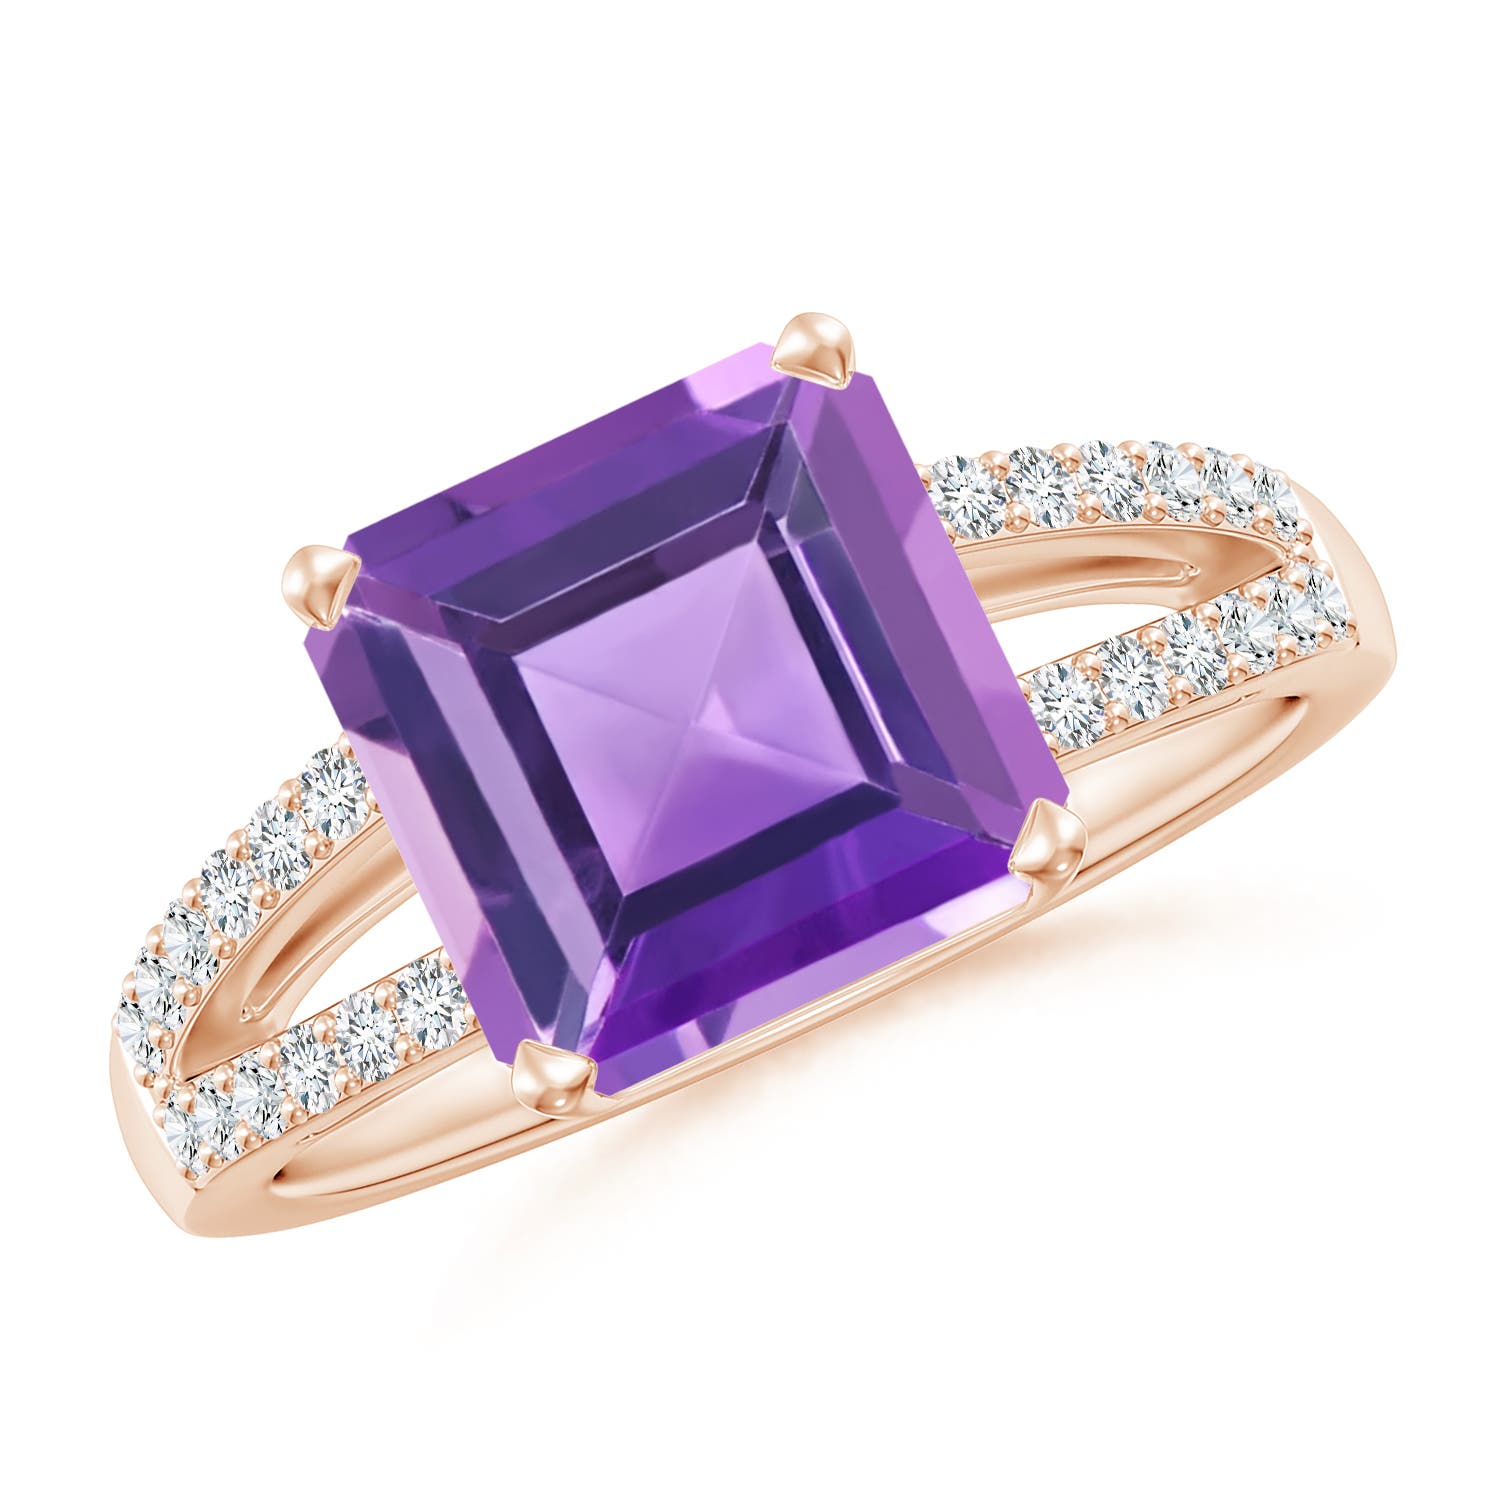 AA - Amethyst / 3.04 CT / 14 KT Rose Gold